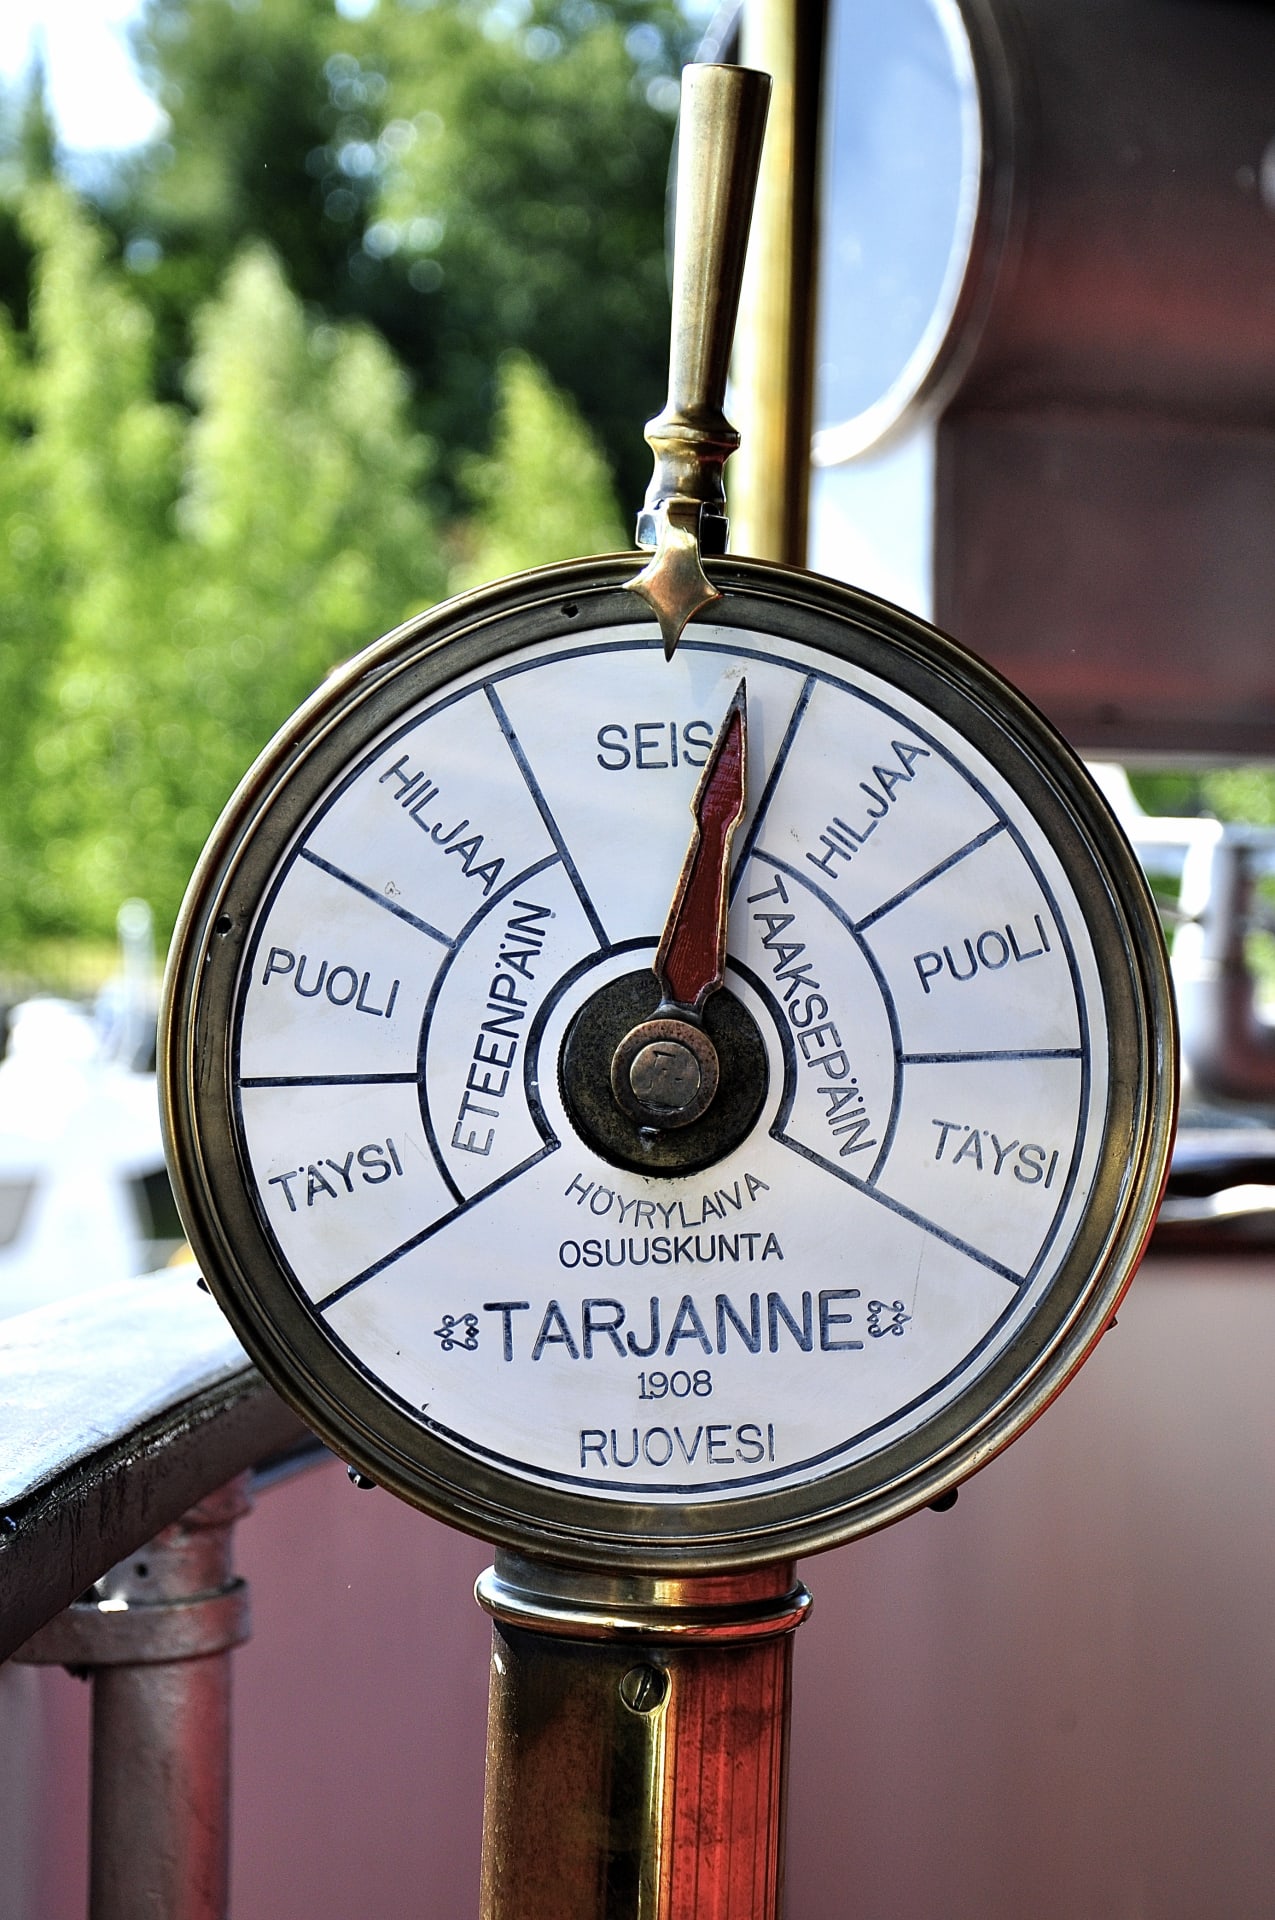 Travel aboard a real steamship..